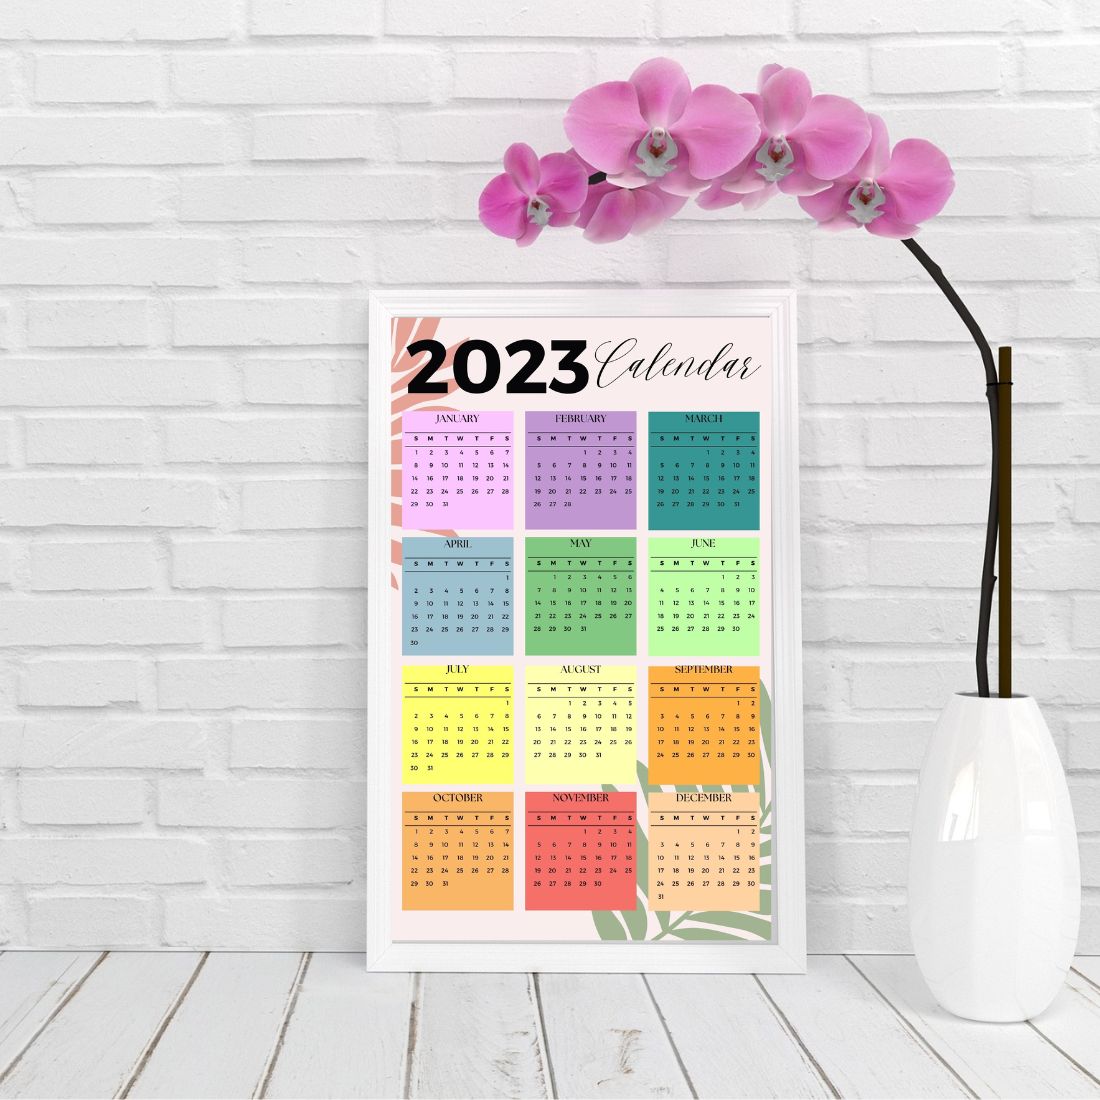 2023 Tropical Colorful Theme Wall Calendar cover image.